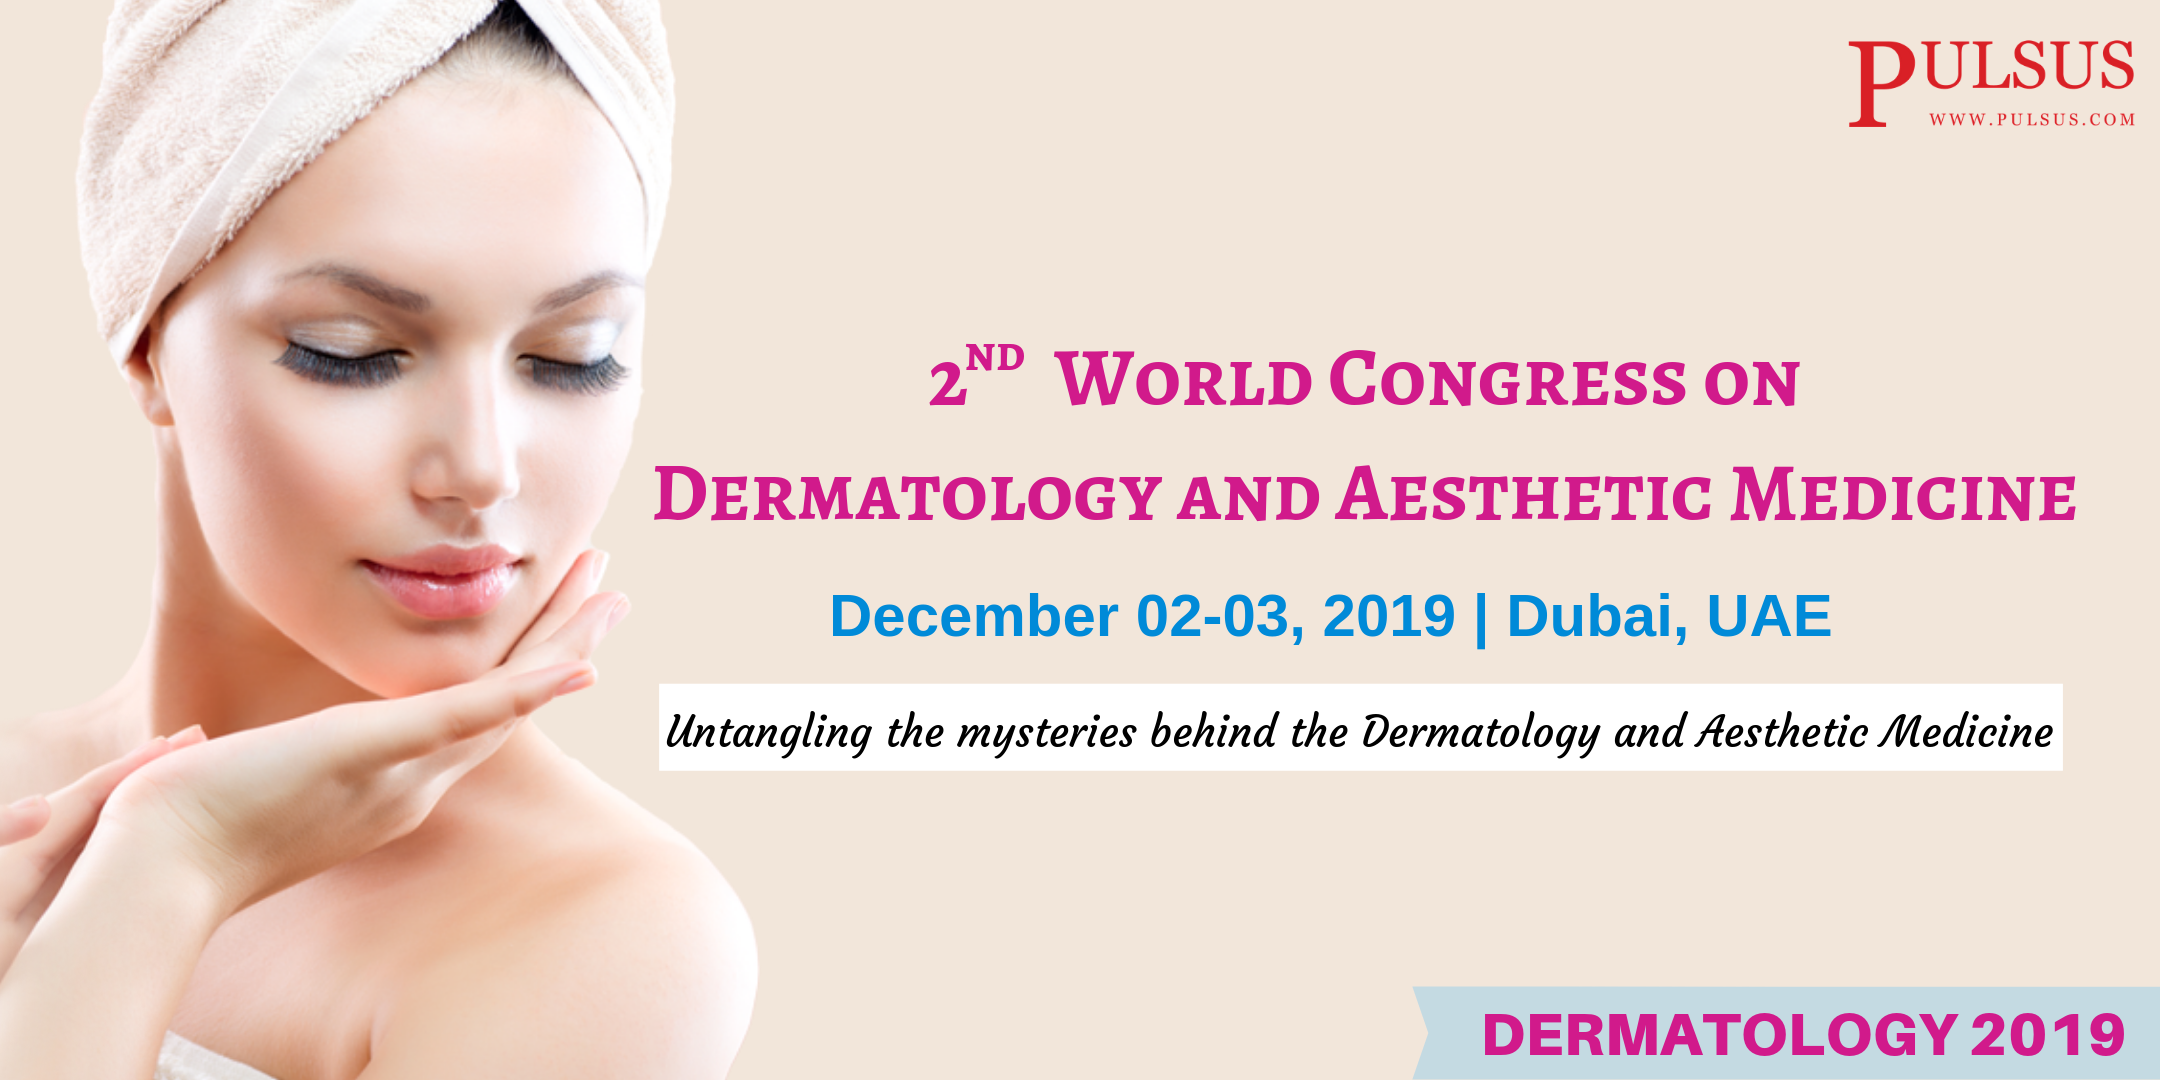 2nd World Congress on Dermatology and Aesthetic Medicine